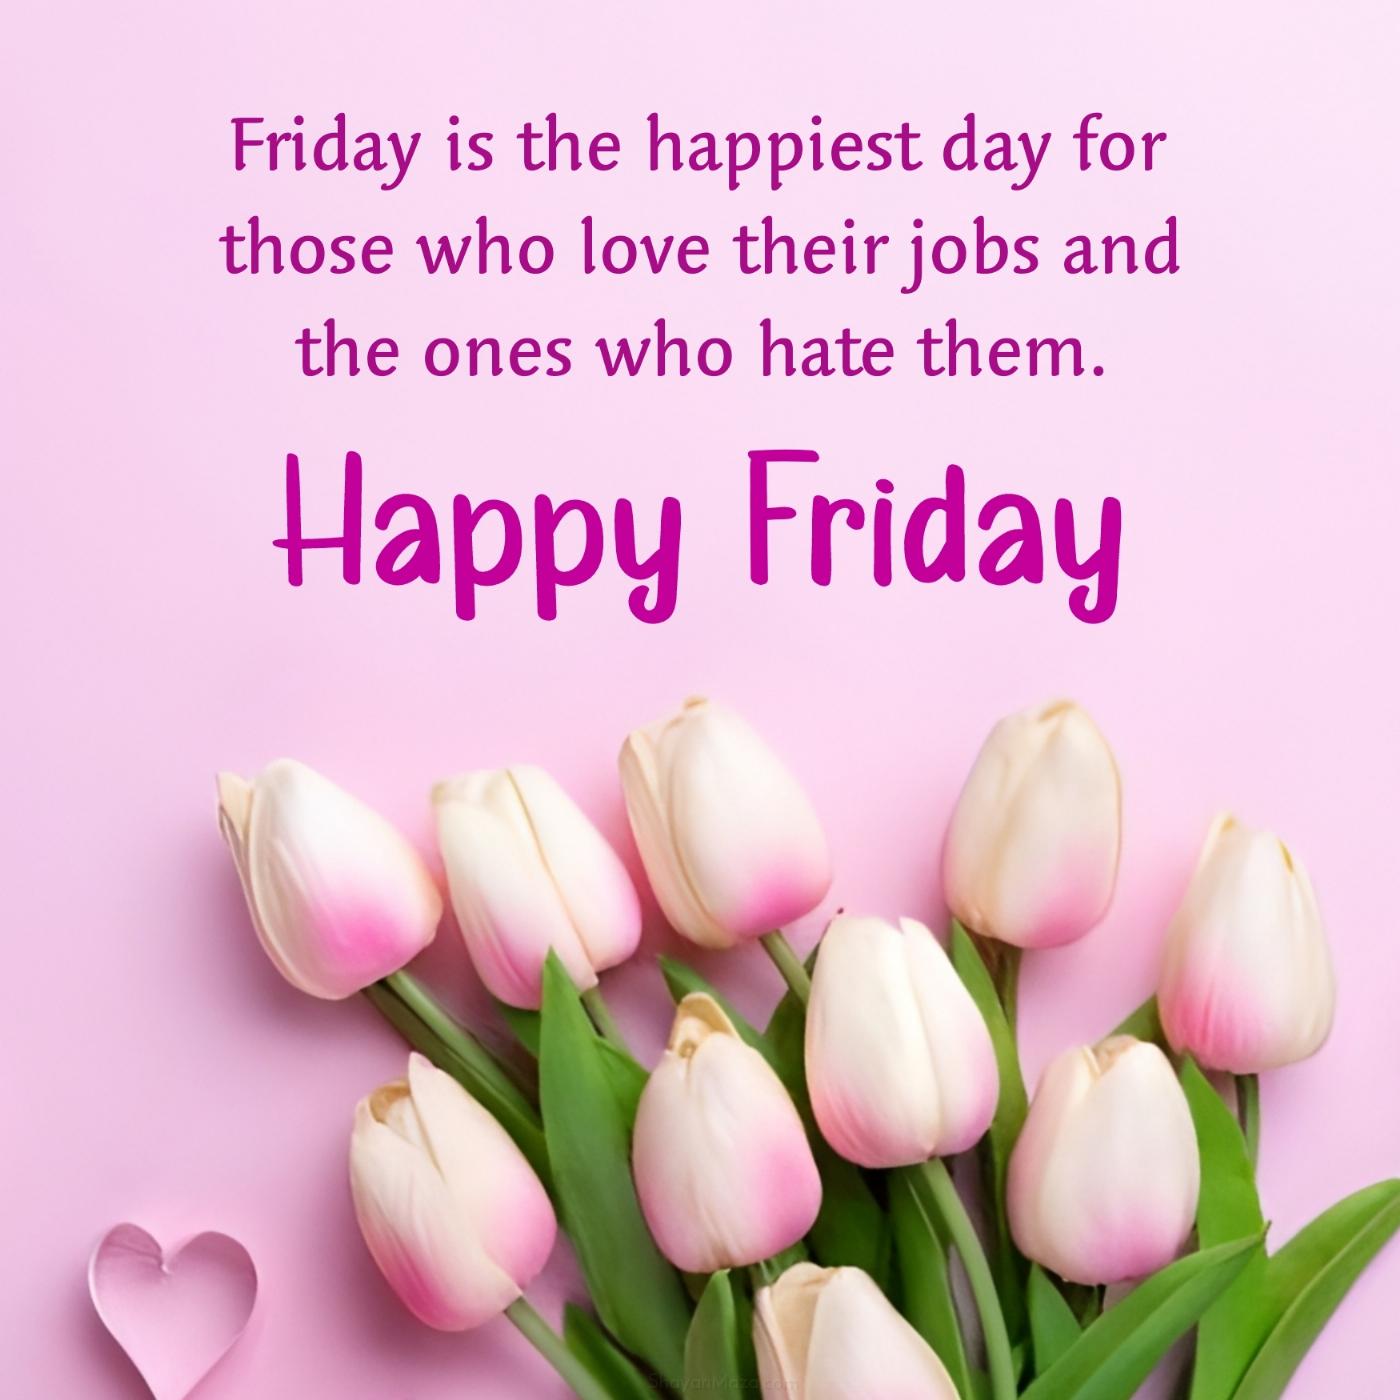 Friday is the happiest day for those who love their jobs